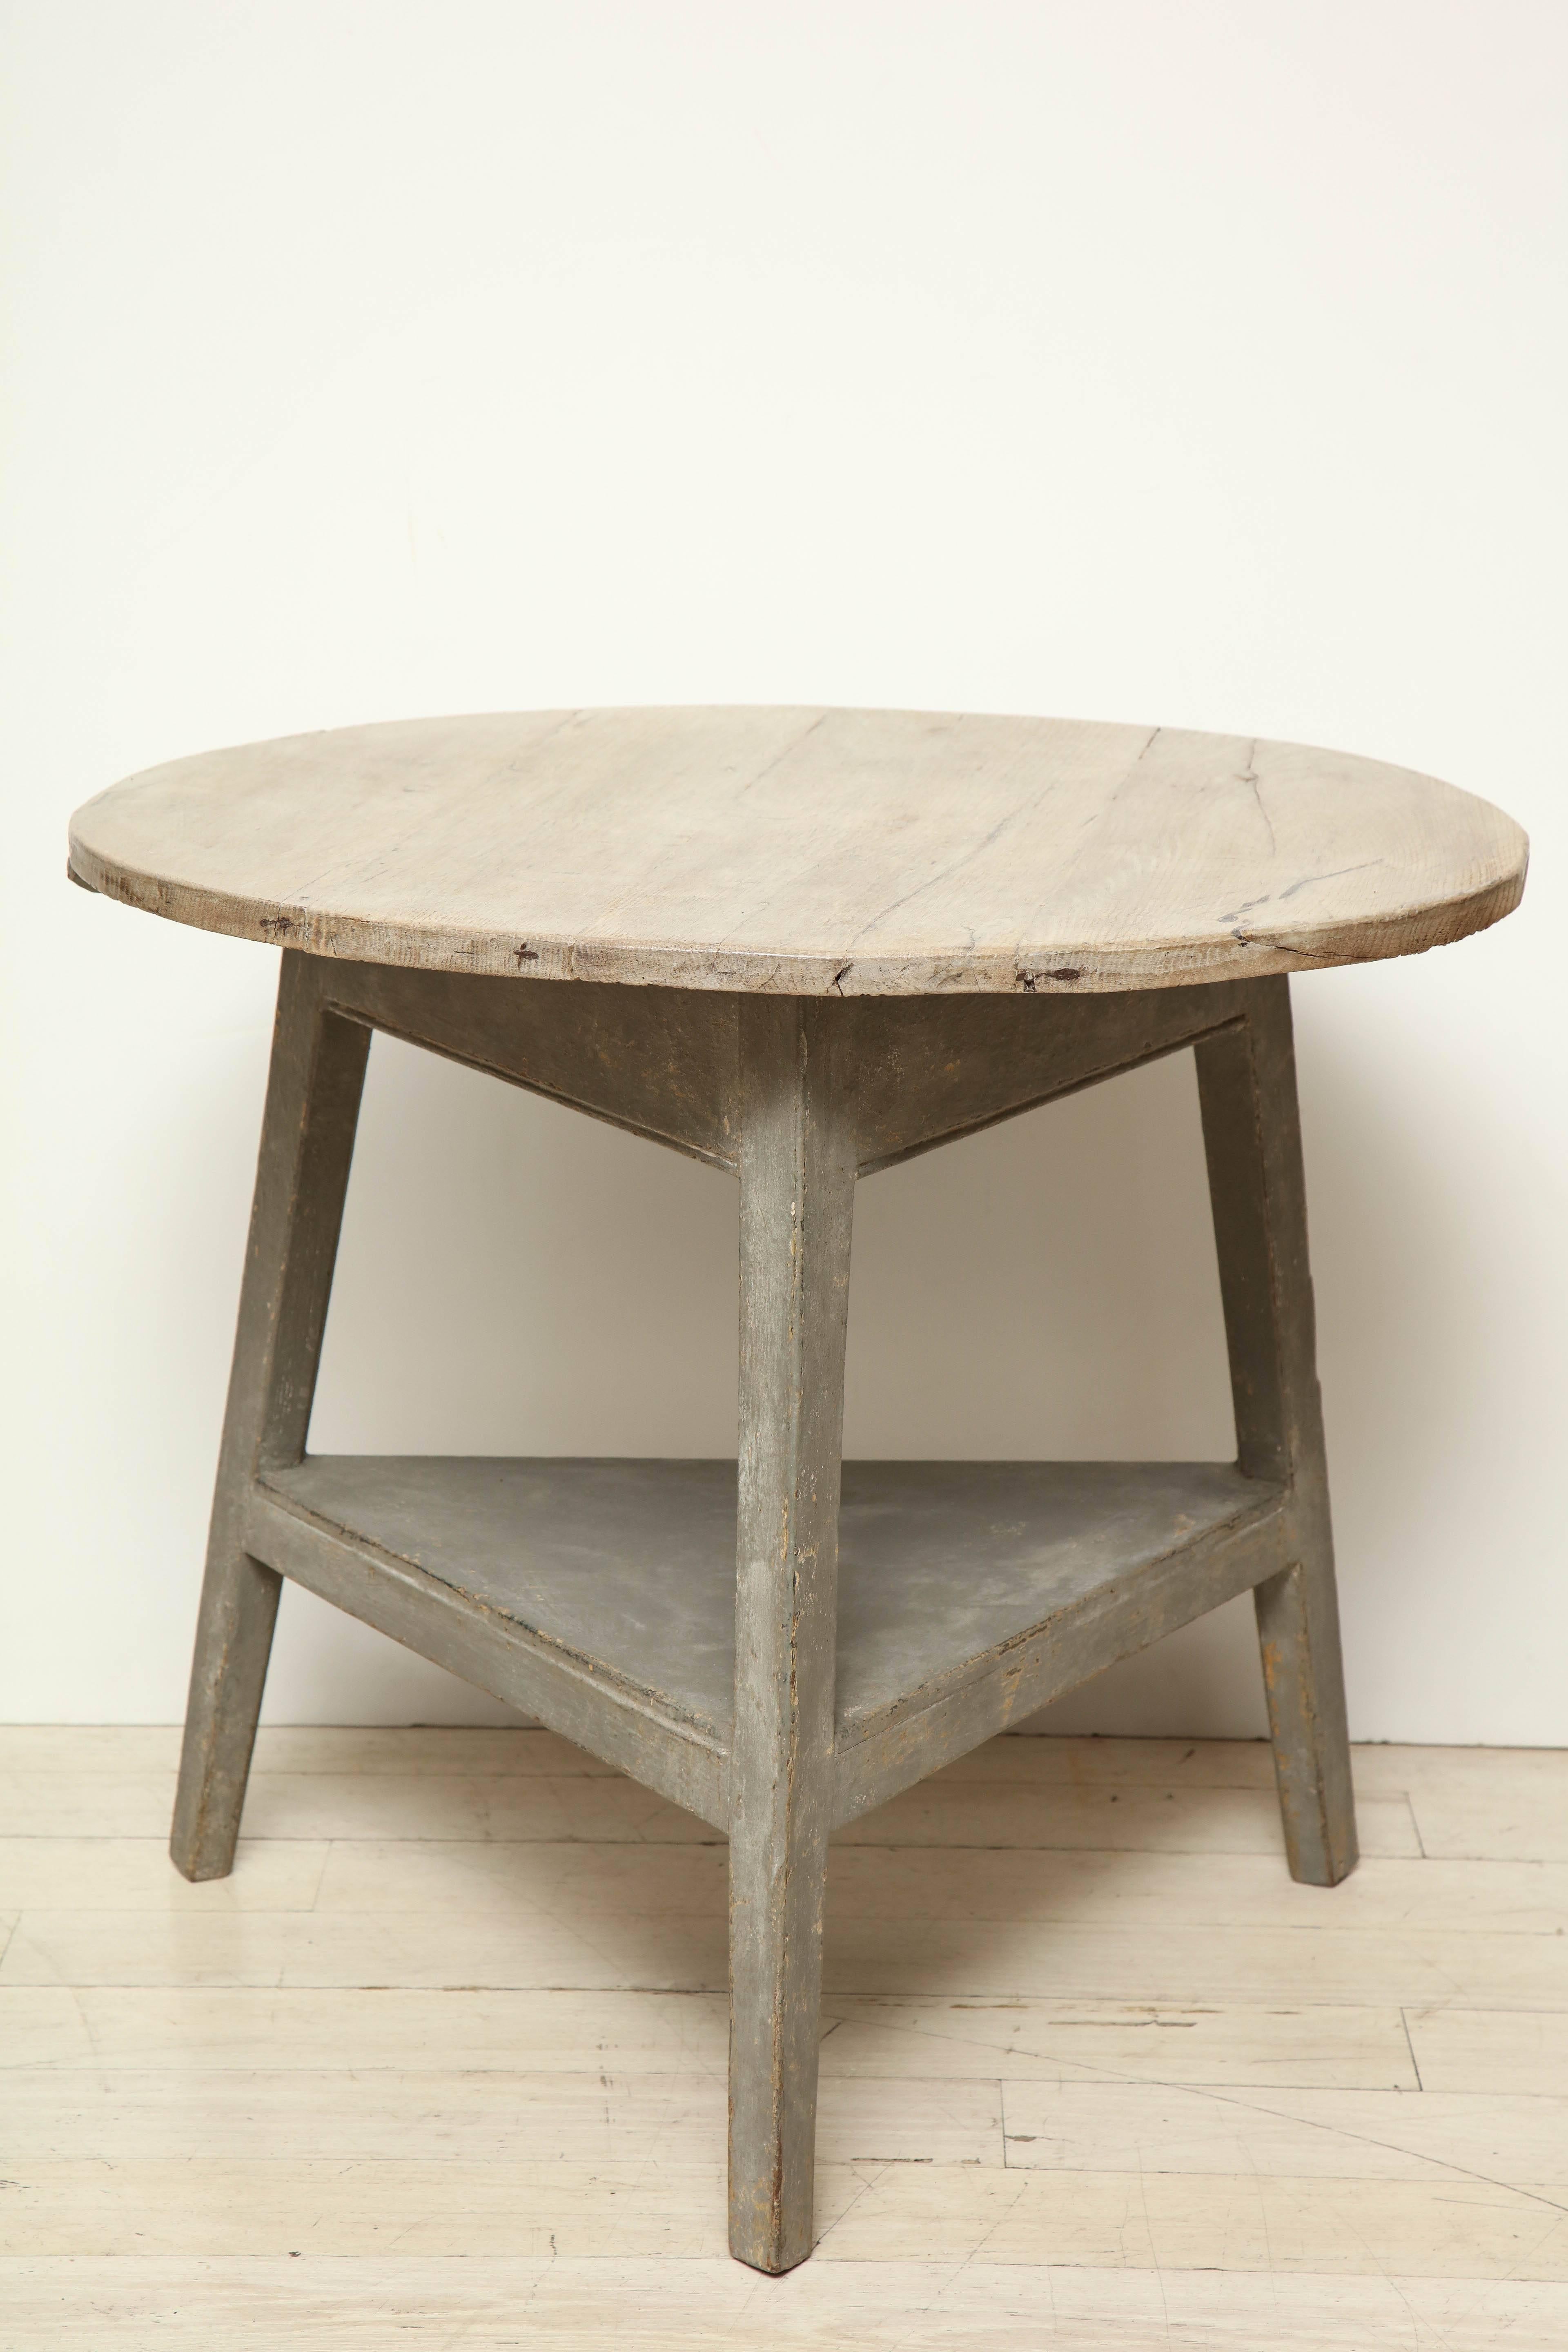 A 19th century French wood cricket table with bleached oak top, painted gray base and bottom shelf, France, circa 1850.